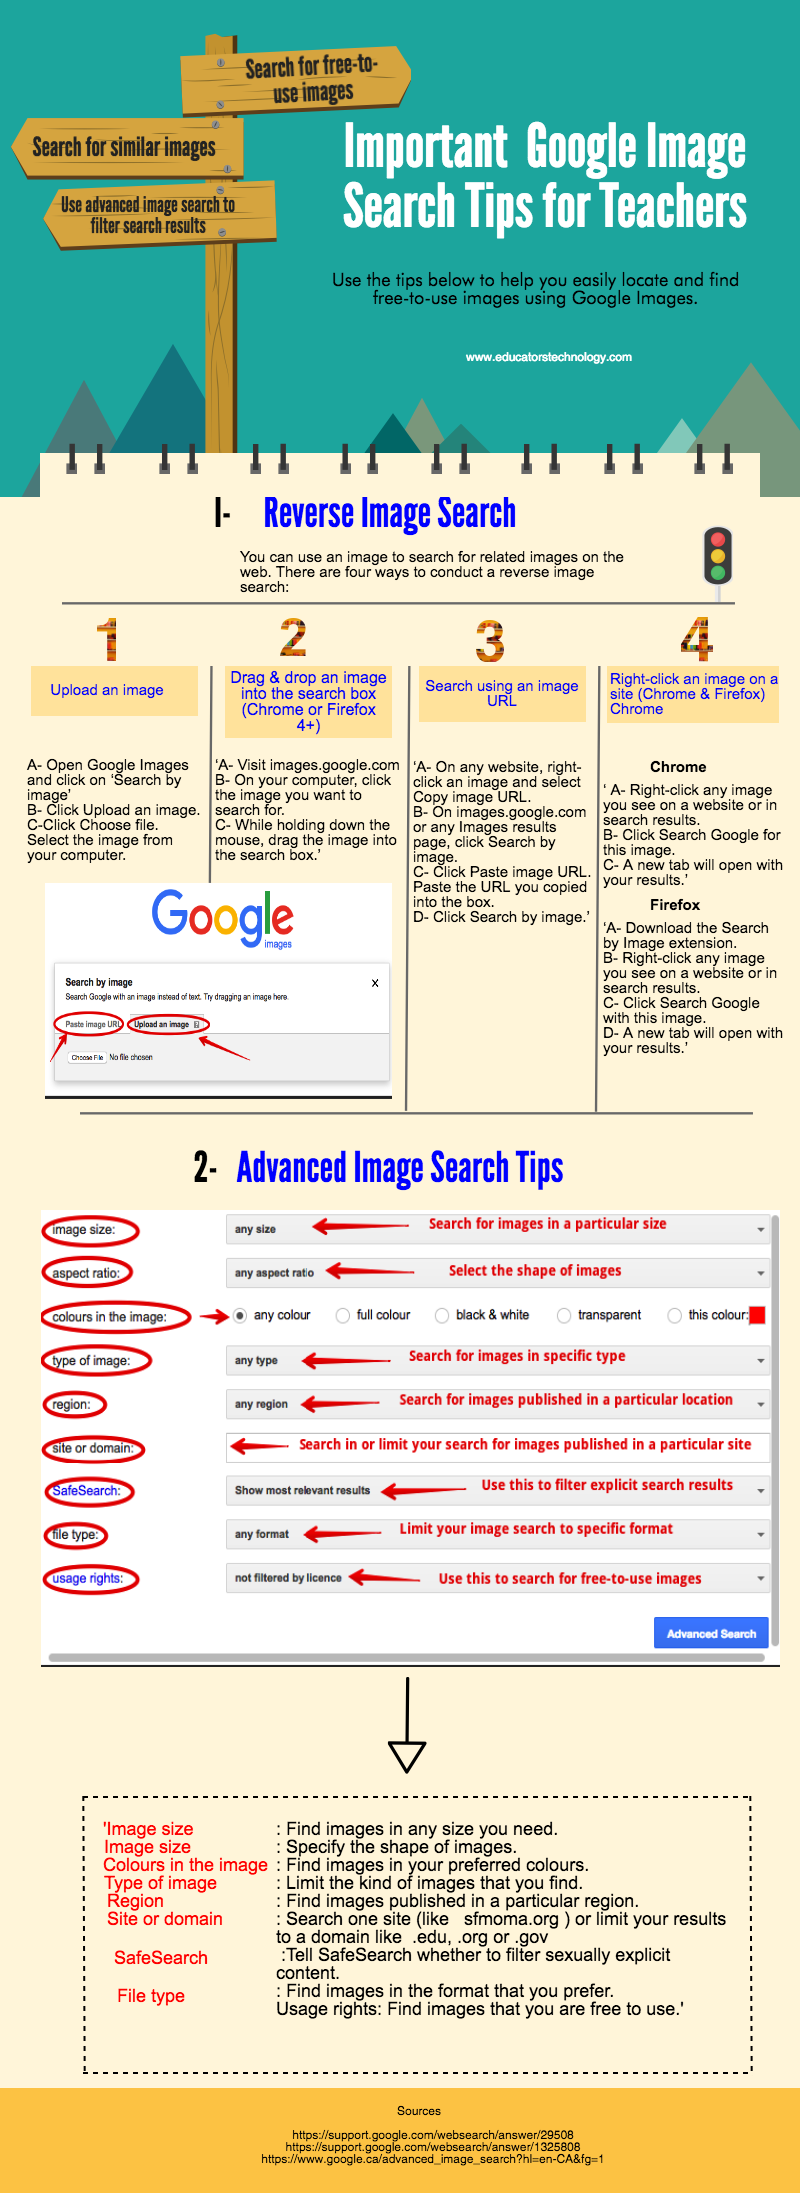 Important Google Image Search Tips for Teachers